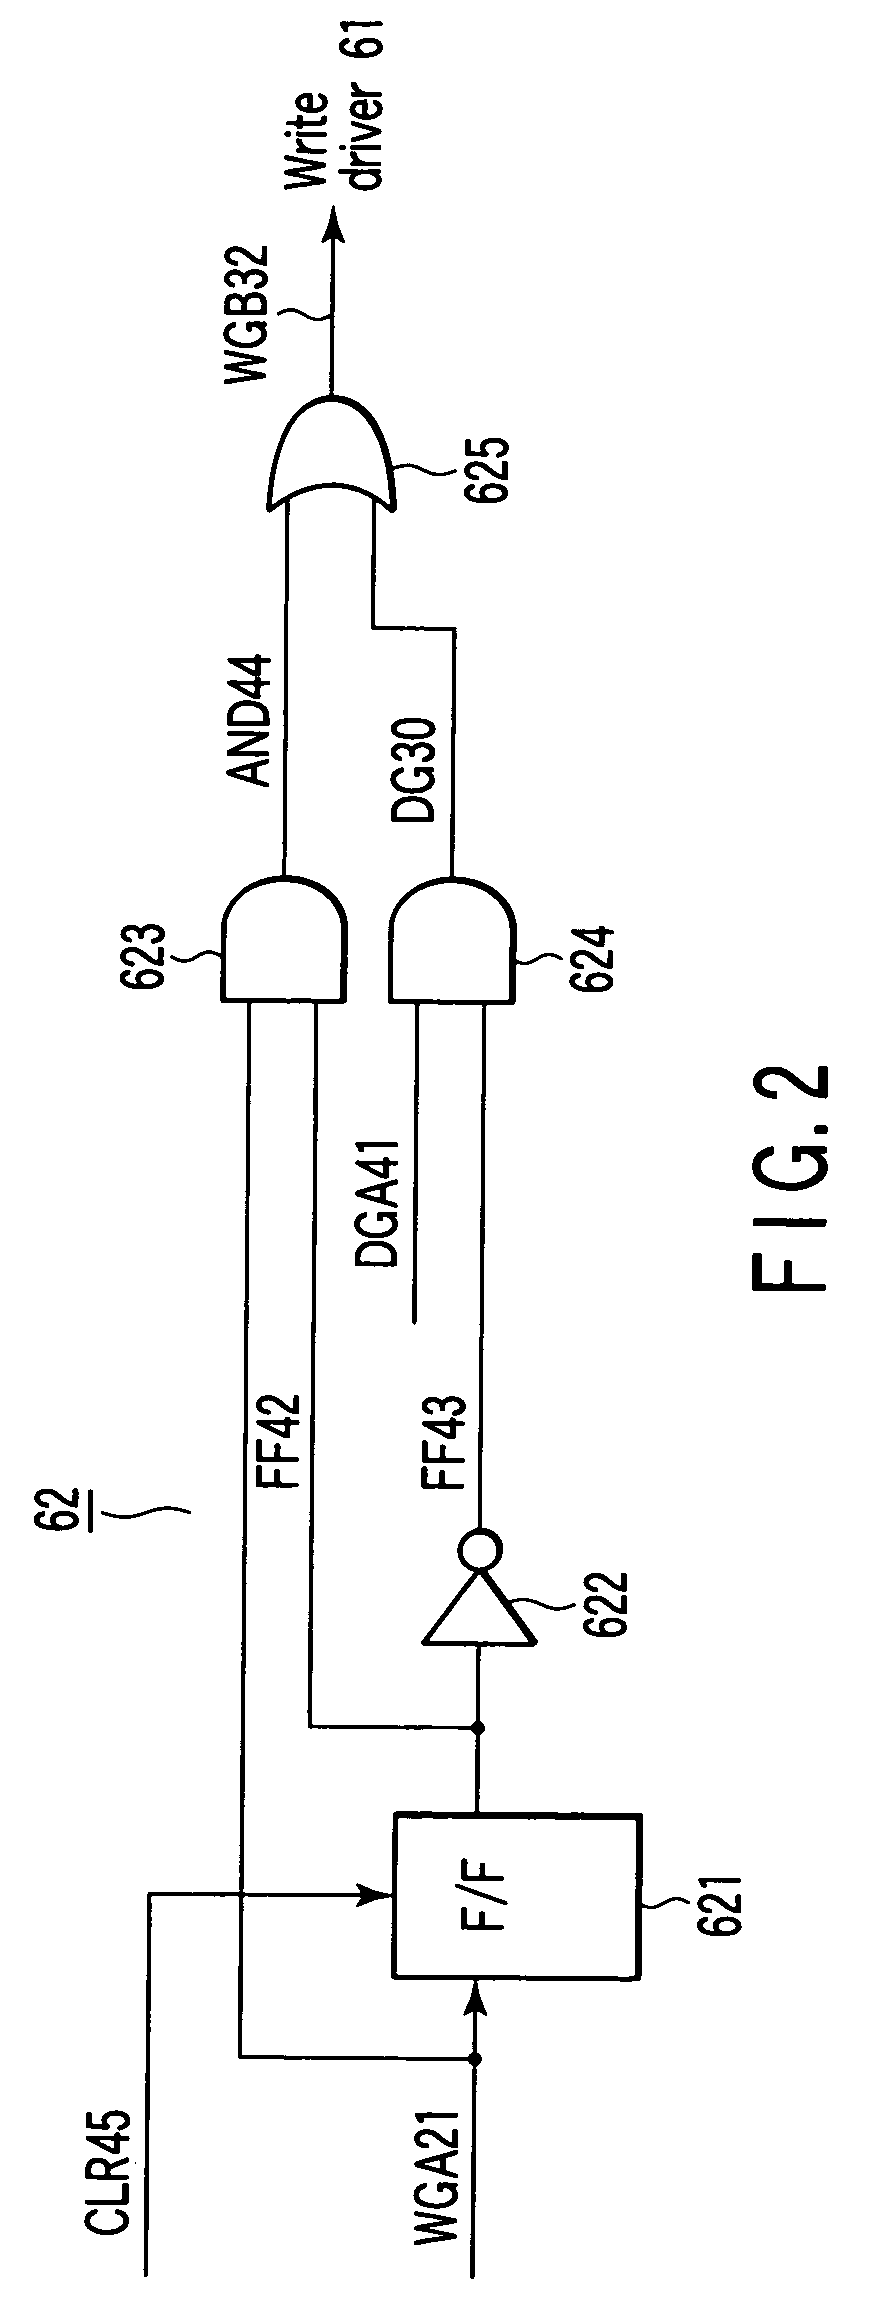 Method and apparatus for magnetization test of write head in a disk drive